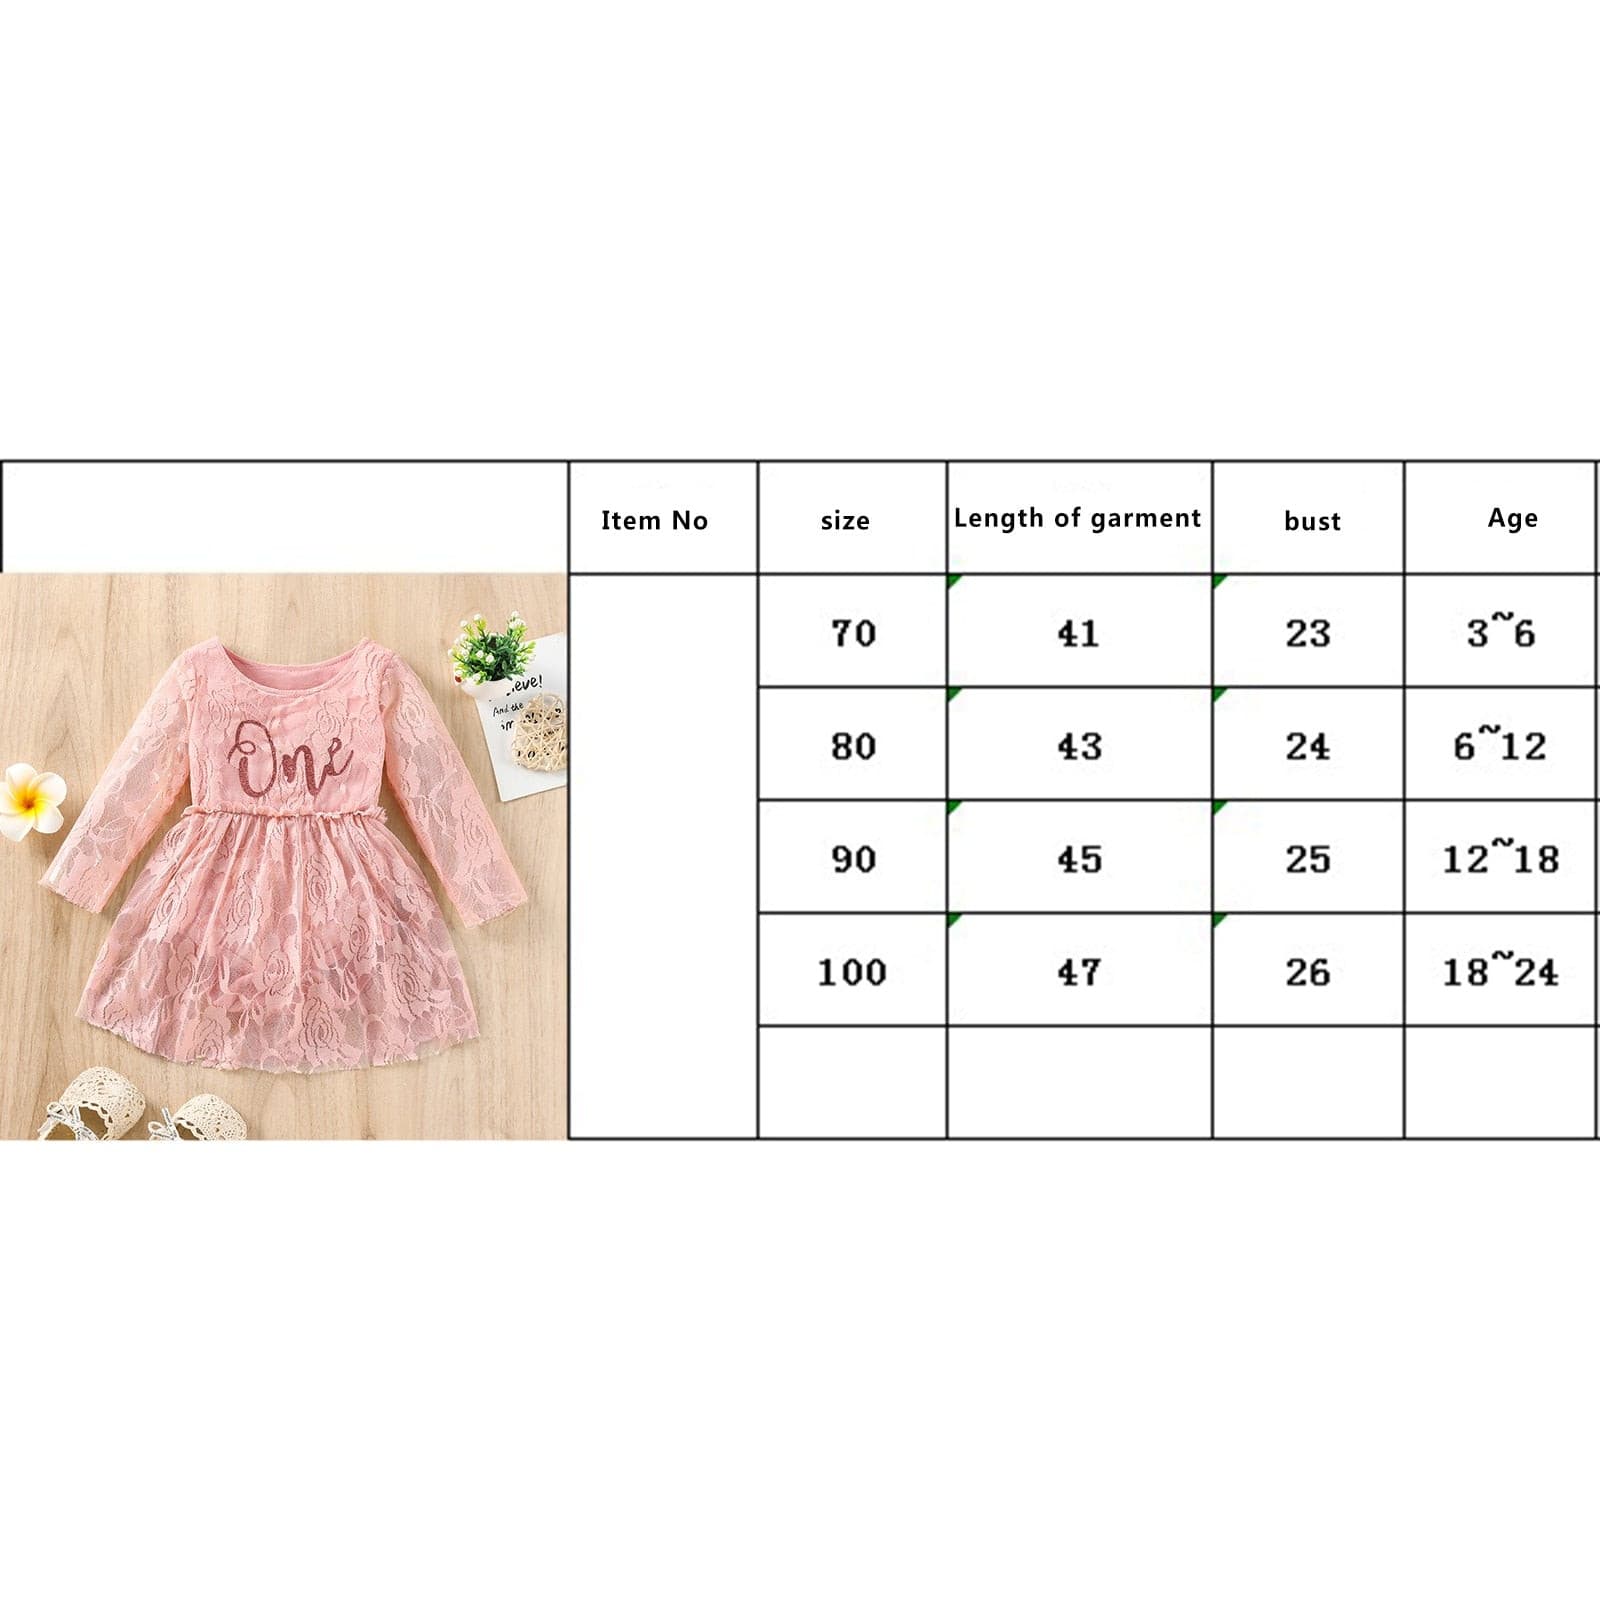 Girls Lace First Birthday Party Romper Dress.